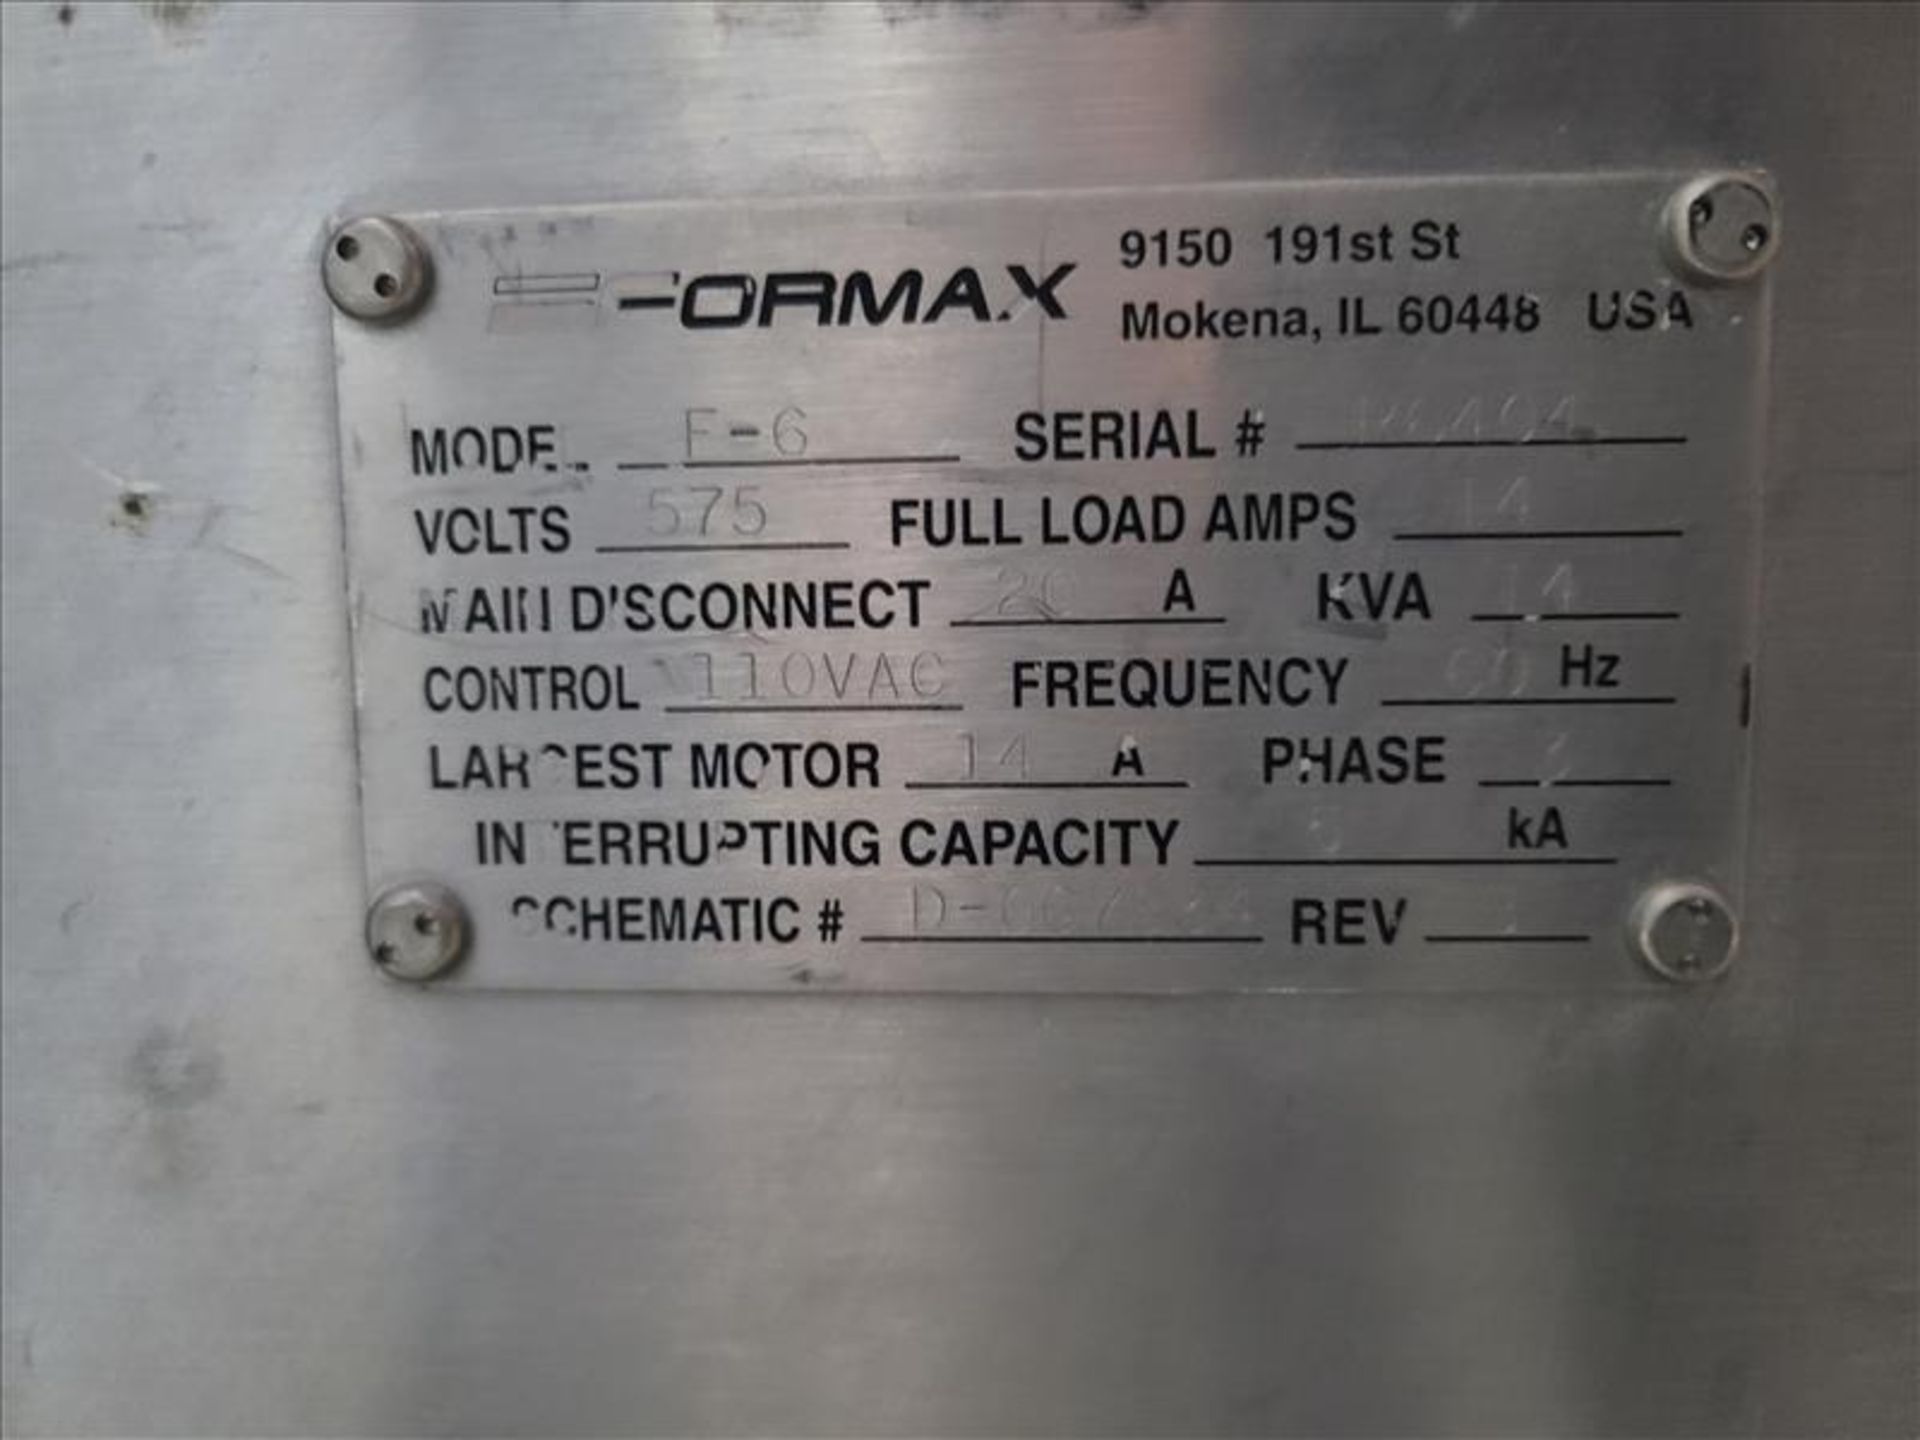 Formax Forming Machine, mod. F-6, ser. no. R6404, 575 volts, 3 phase, 60 Hz [Loc.Warehouse] - Image 5 of 5